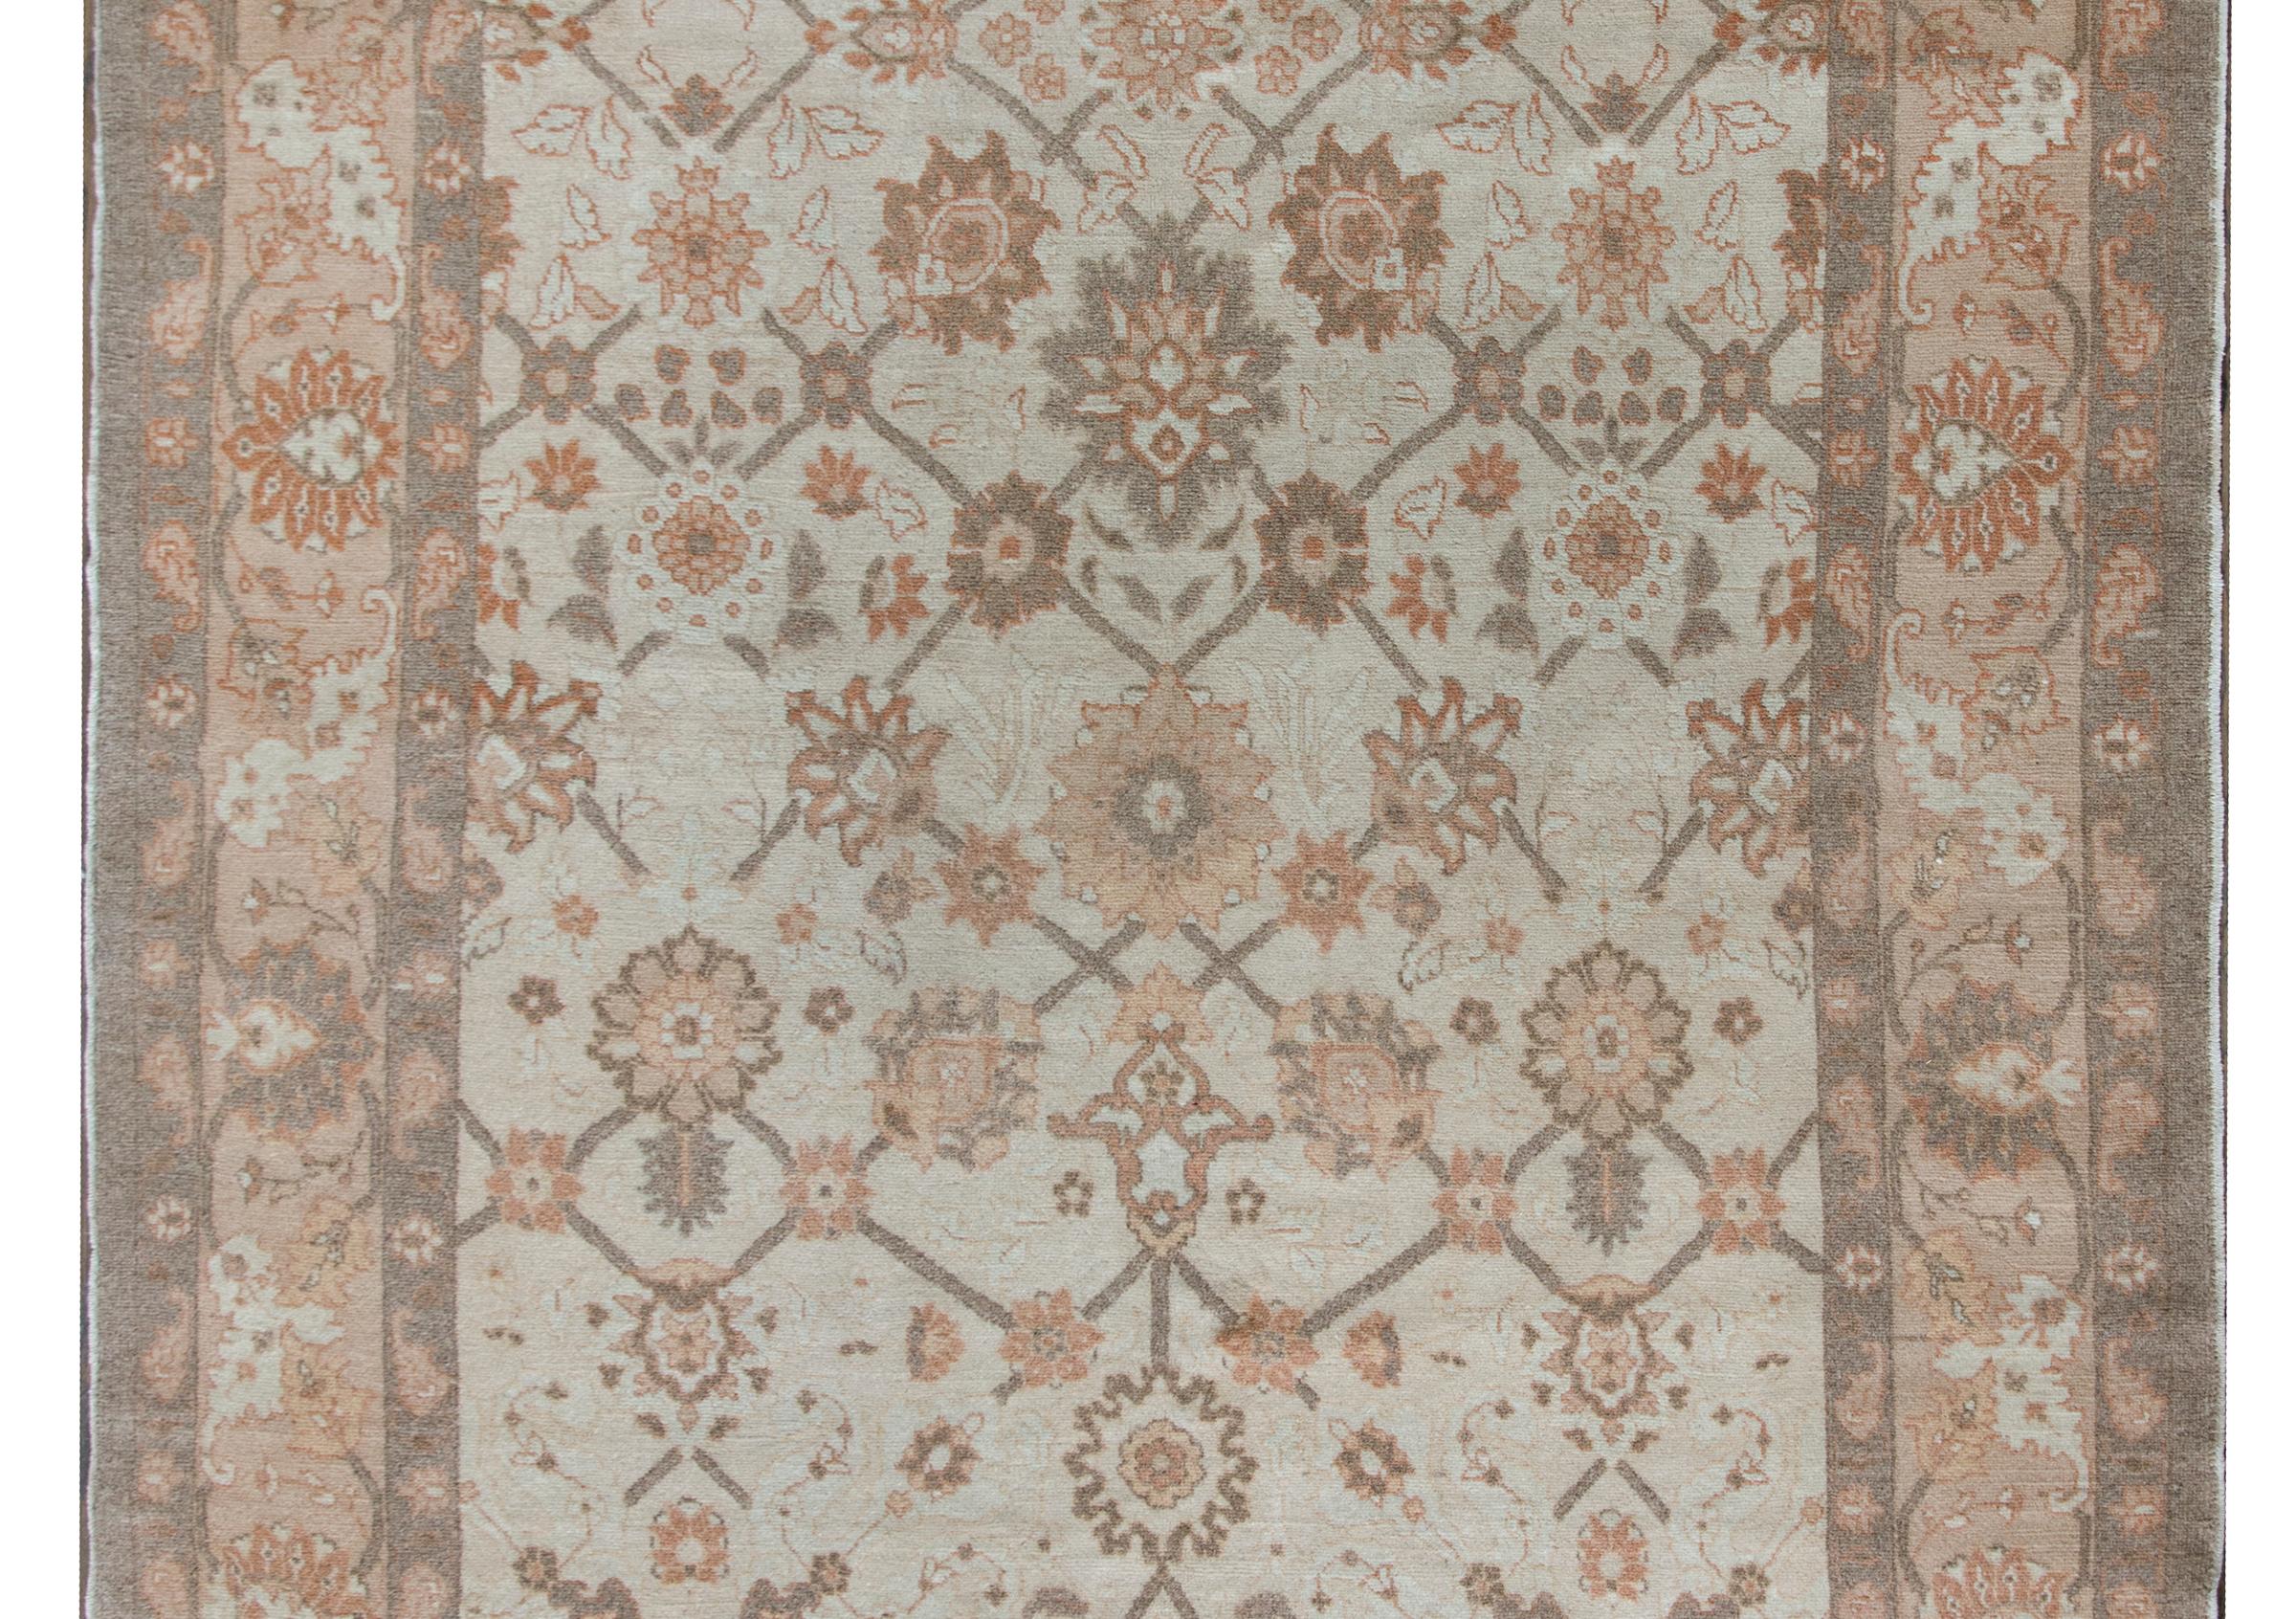 A chic late 20th century Persian Tabriz rug with a wonderful trellis floral pattern with the most wonderful large-scale flowers, surrounded by a wide border with multiple floral and scrolling vine patterns, and all woven in muted grays, browns, and